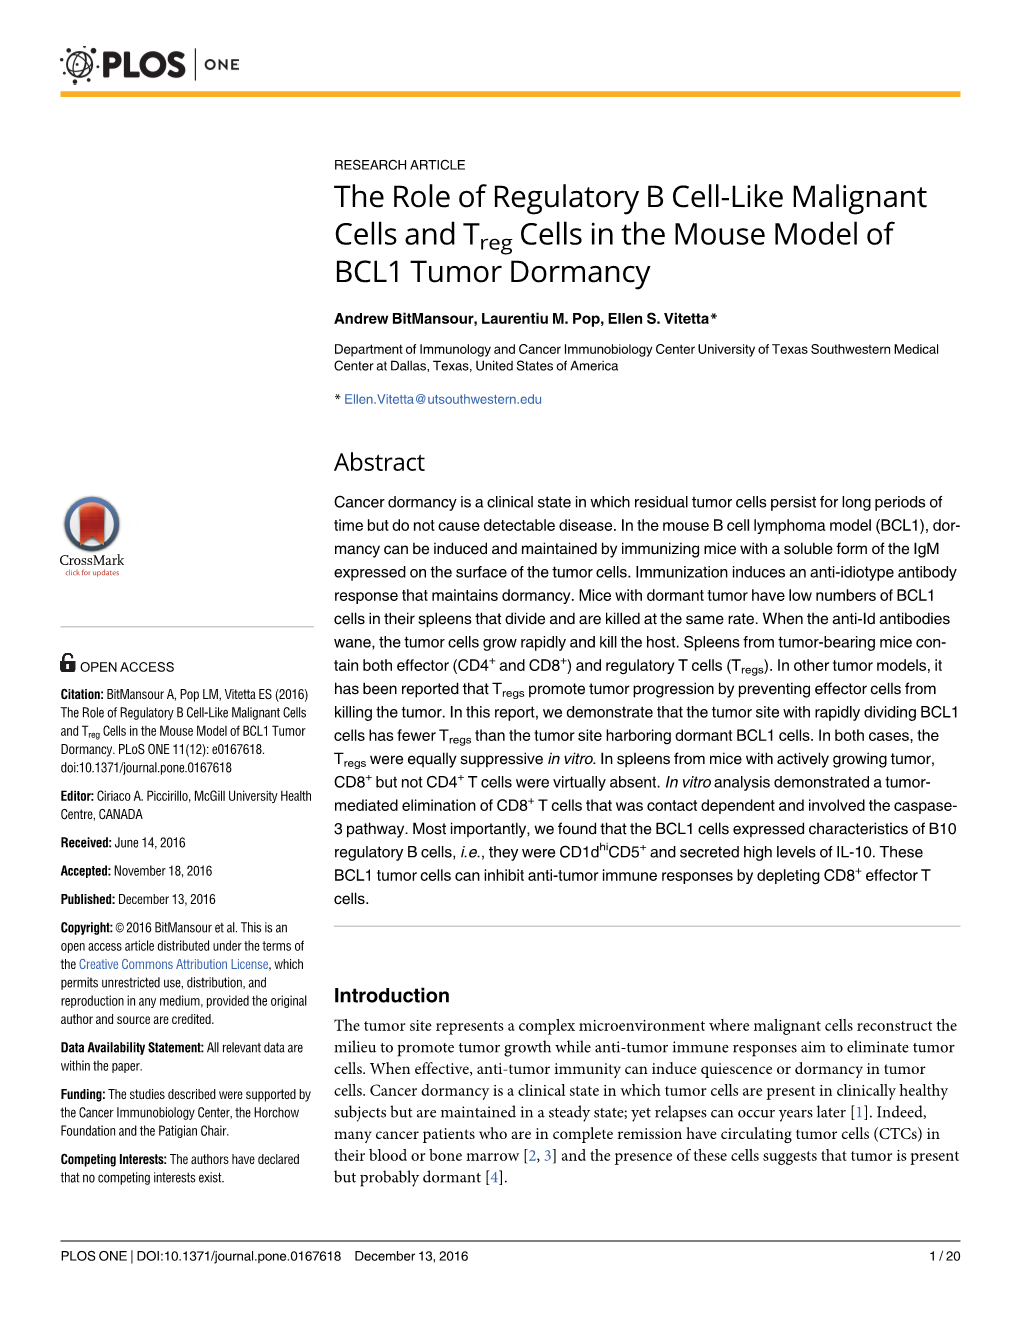 The Role of Regulatory B Cell-Like Malignant Cells and Treg Cells In